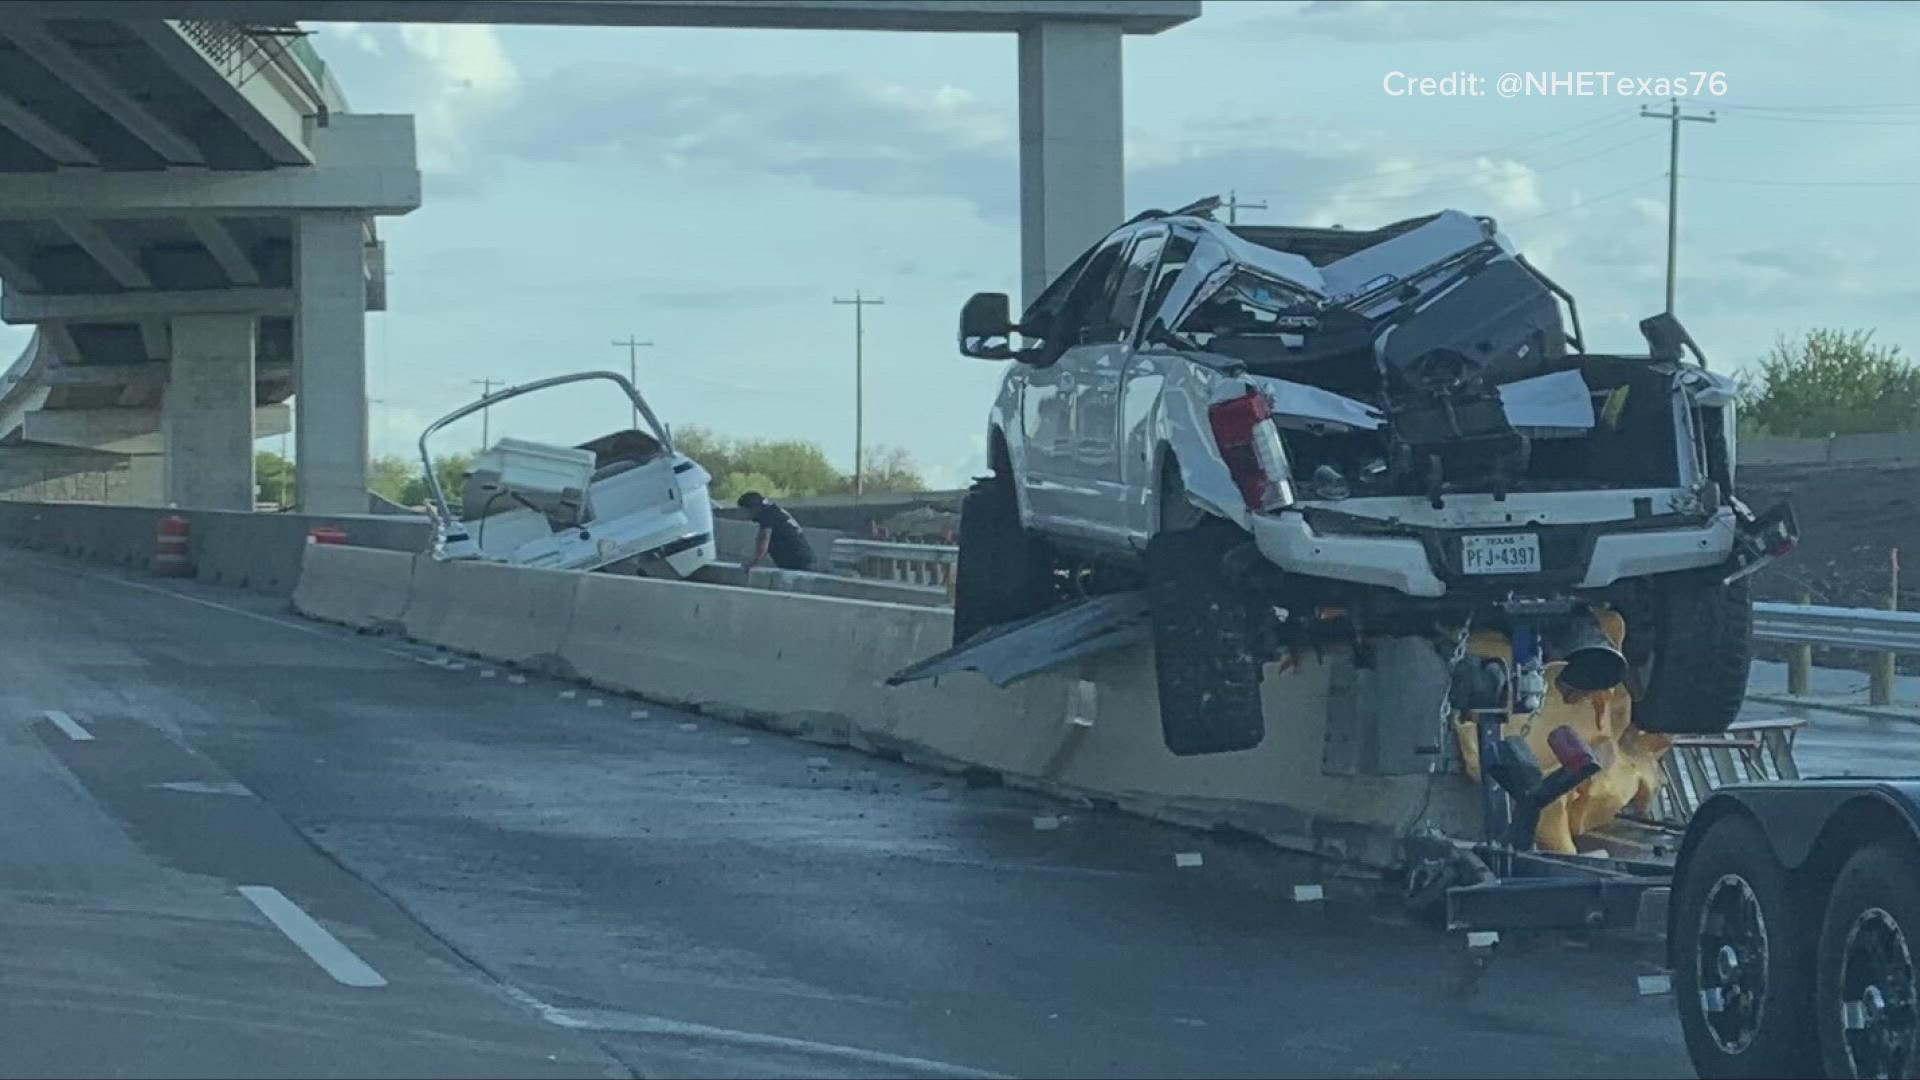 Fort Worth police said the crash happened in the southbound lanes of I-35W near State Highway 170.